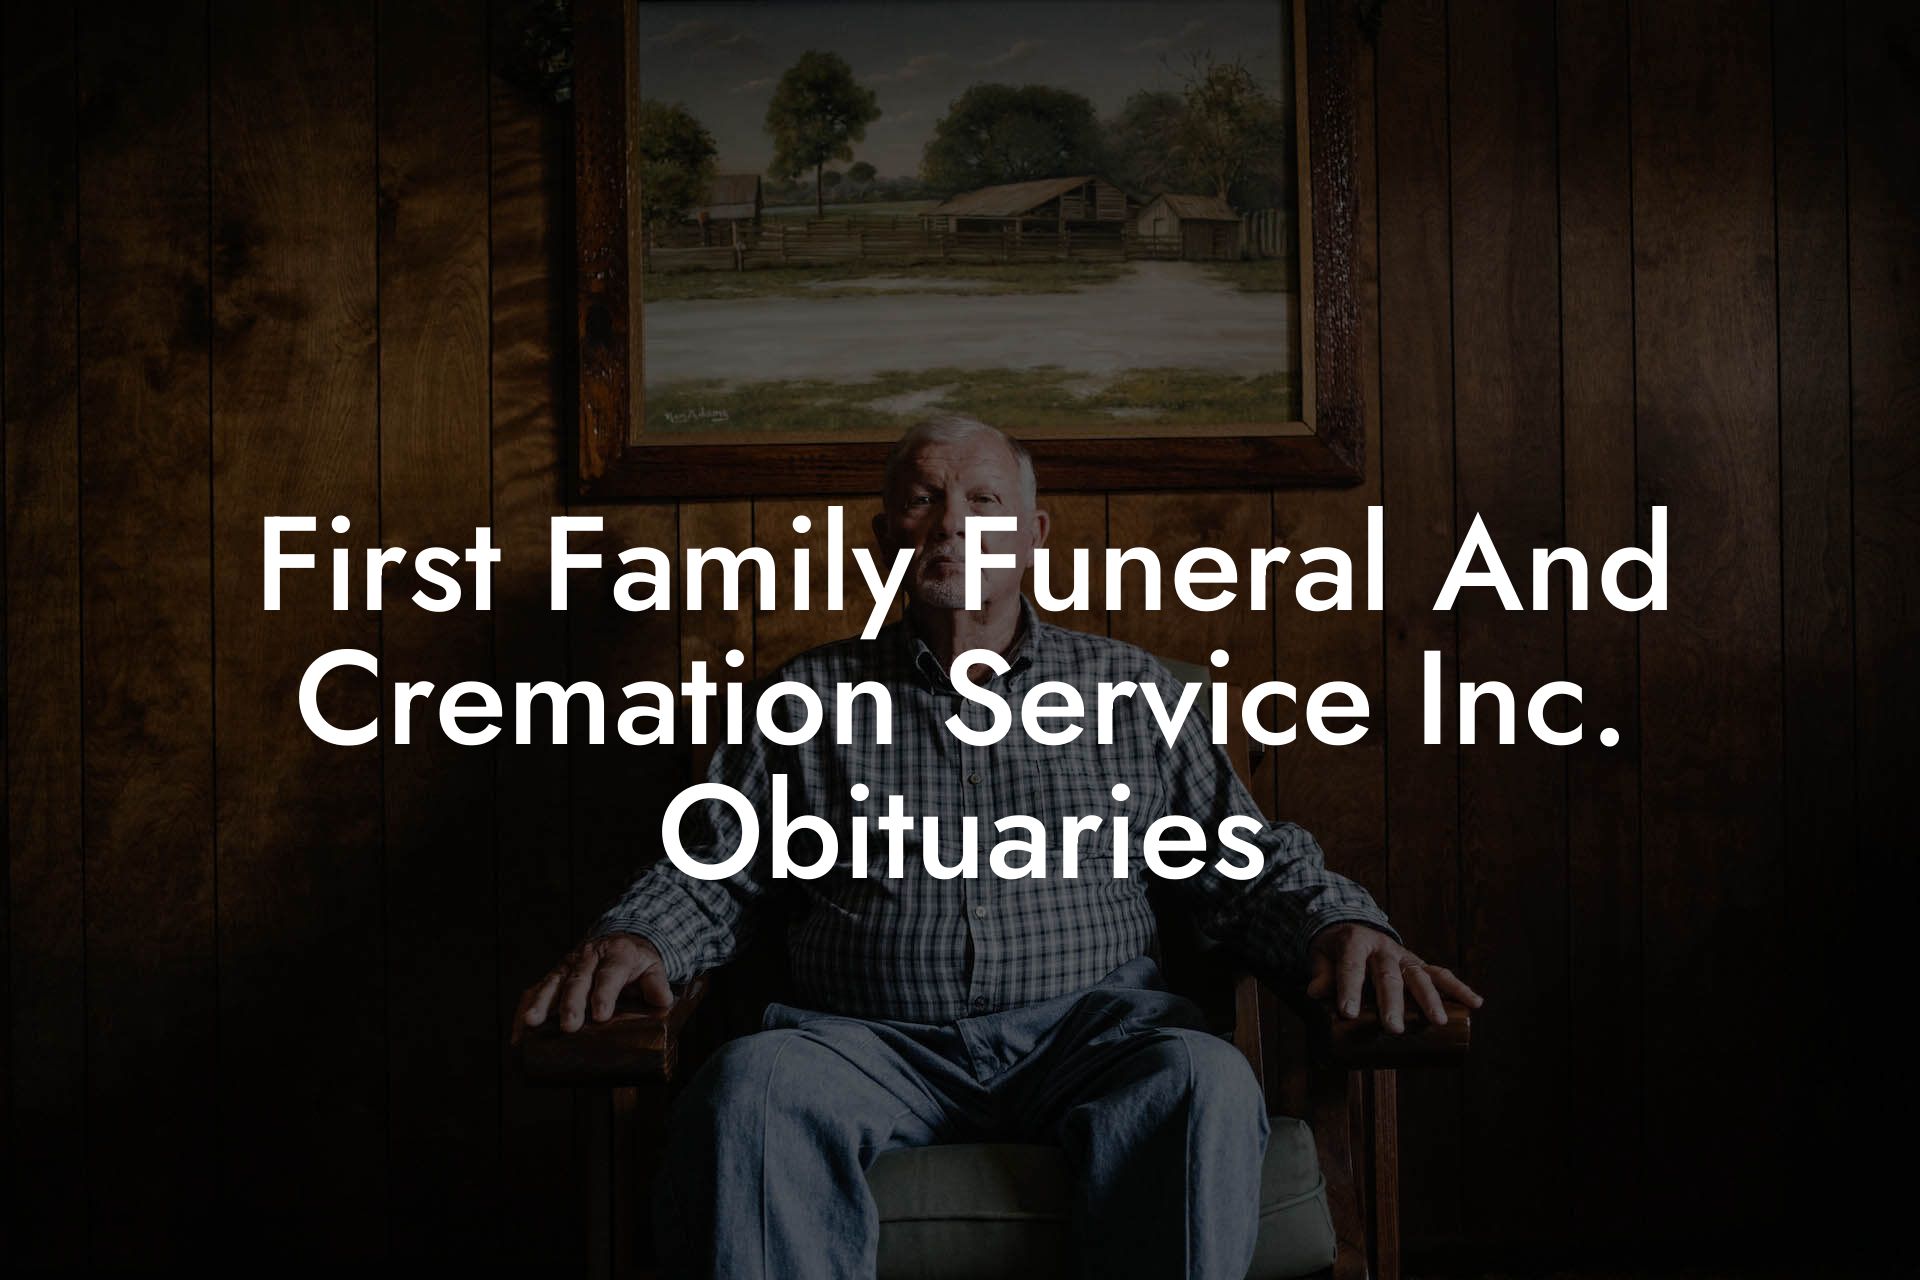 First Family Funeral And Cremation Service Inc. Obituaries